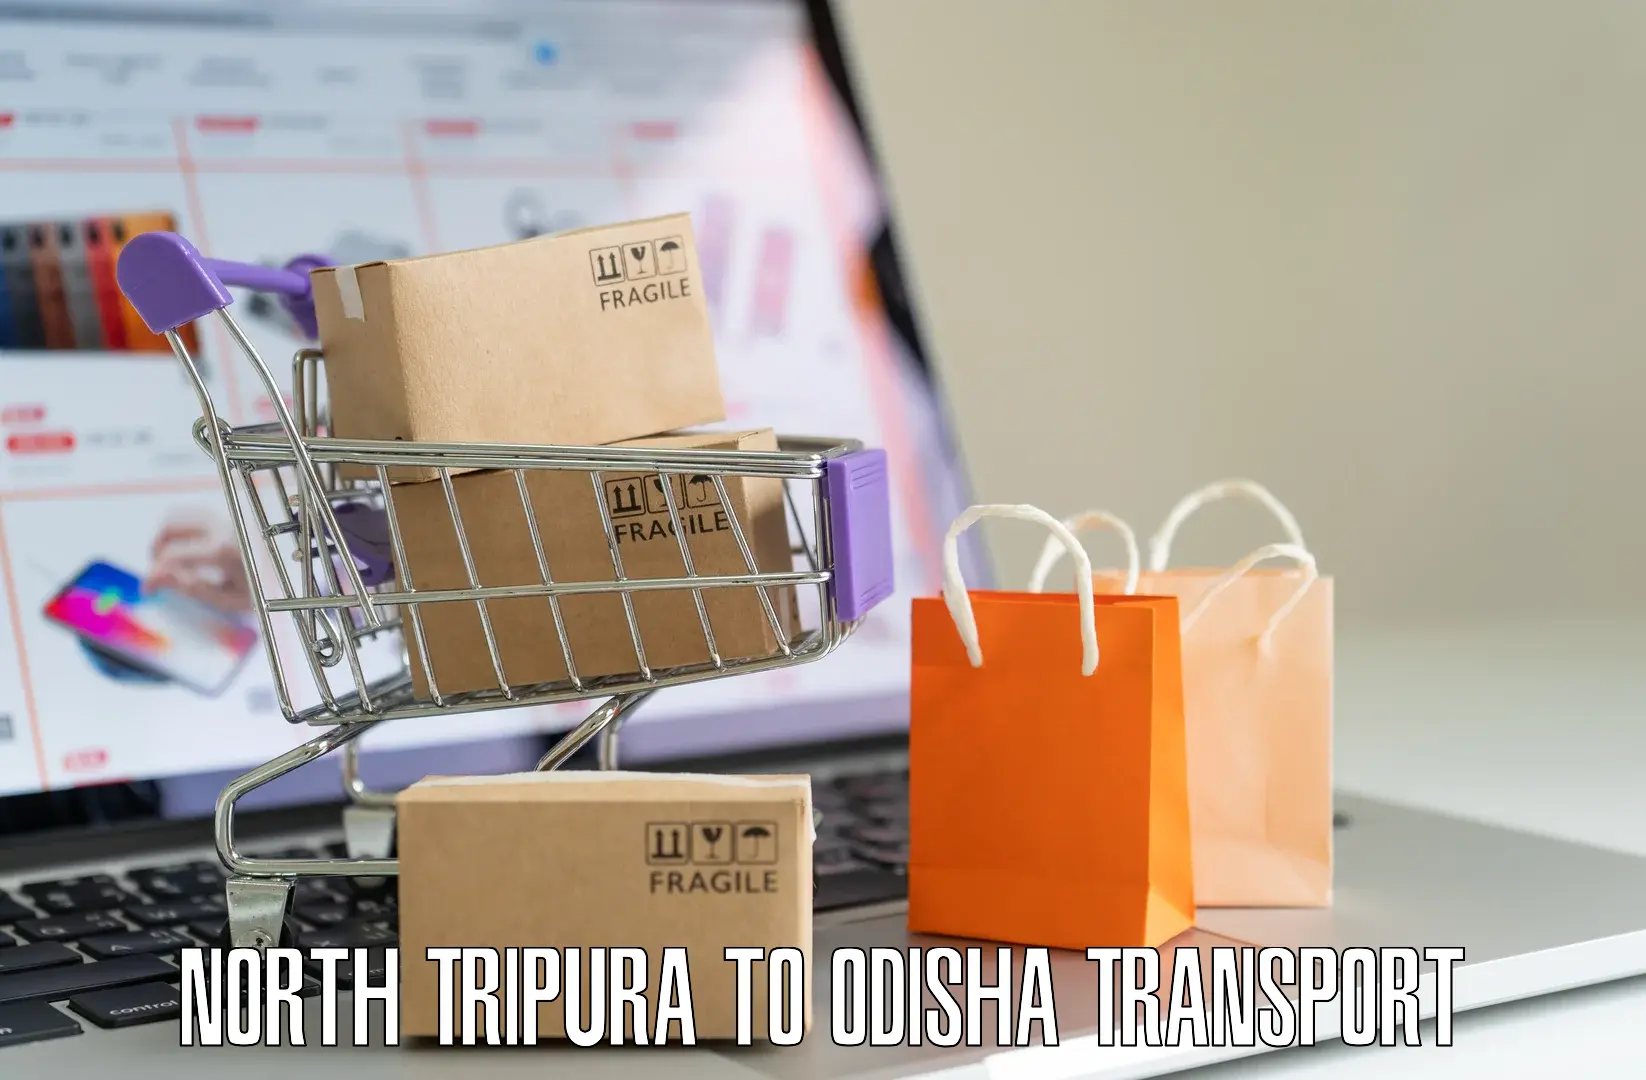 Vehicle courier services North Tripura to Jashipur